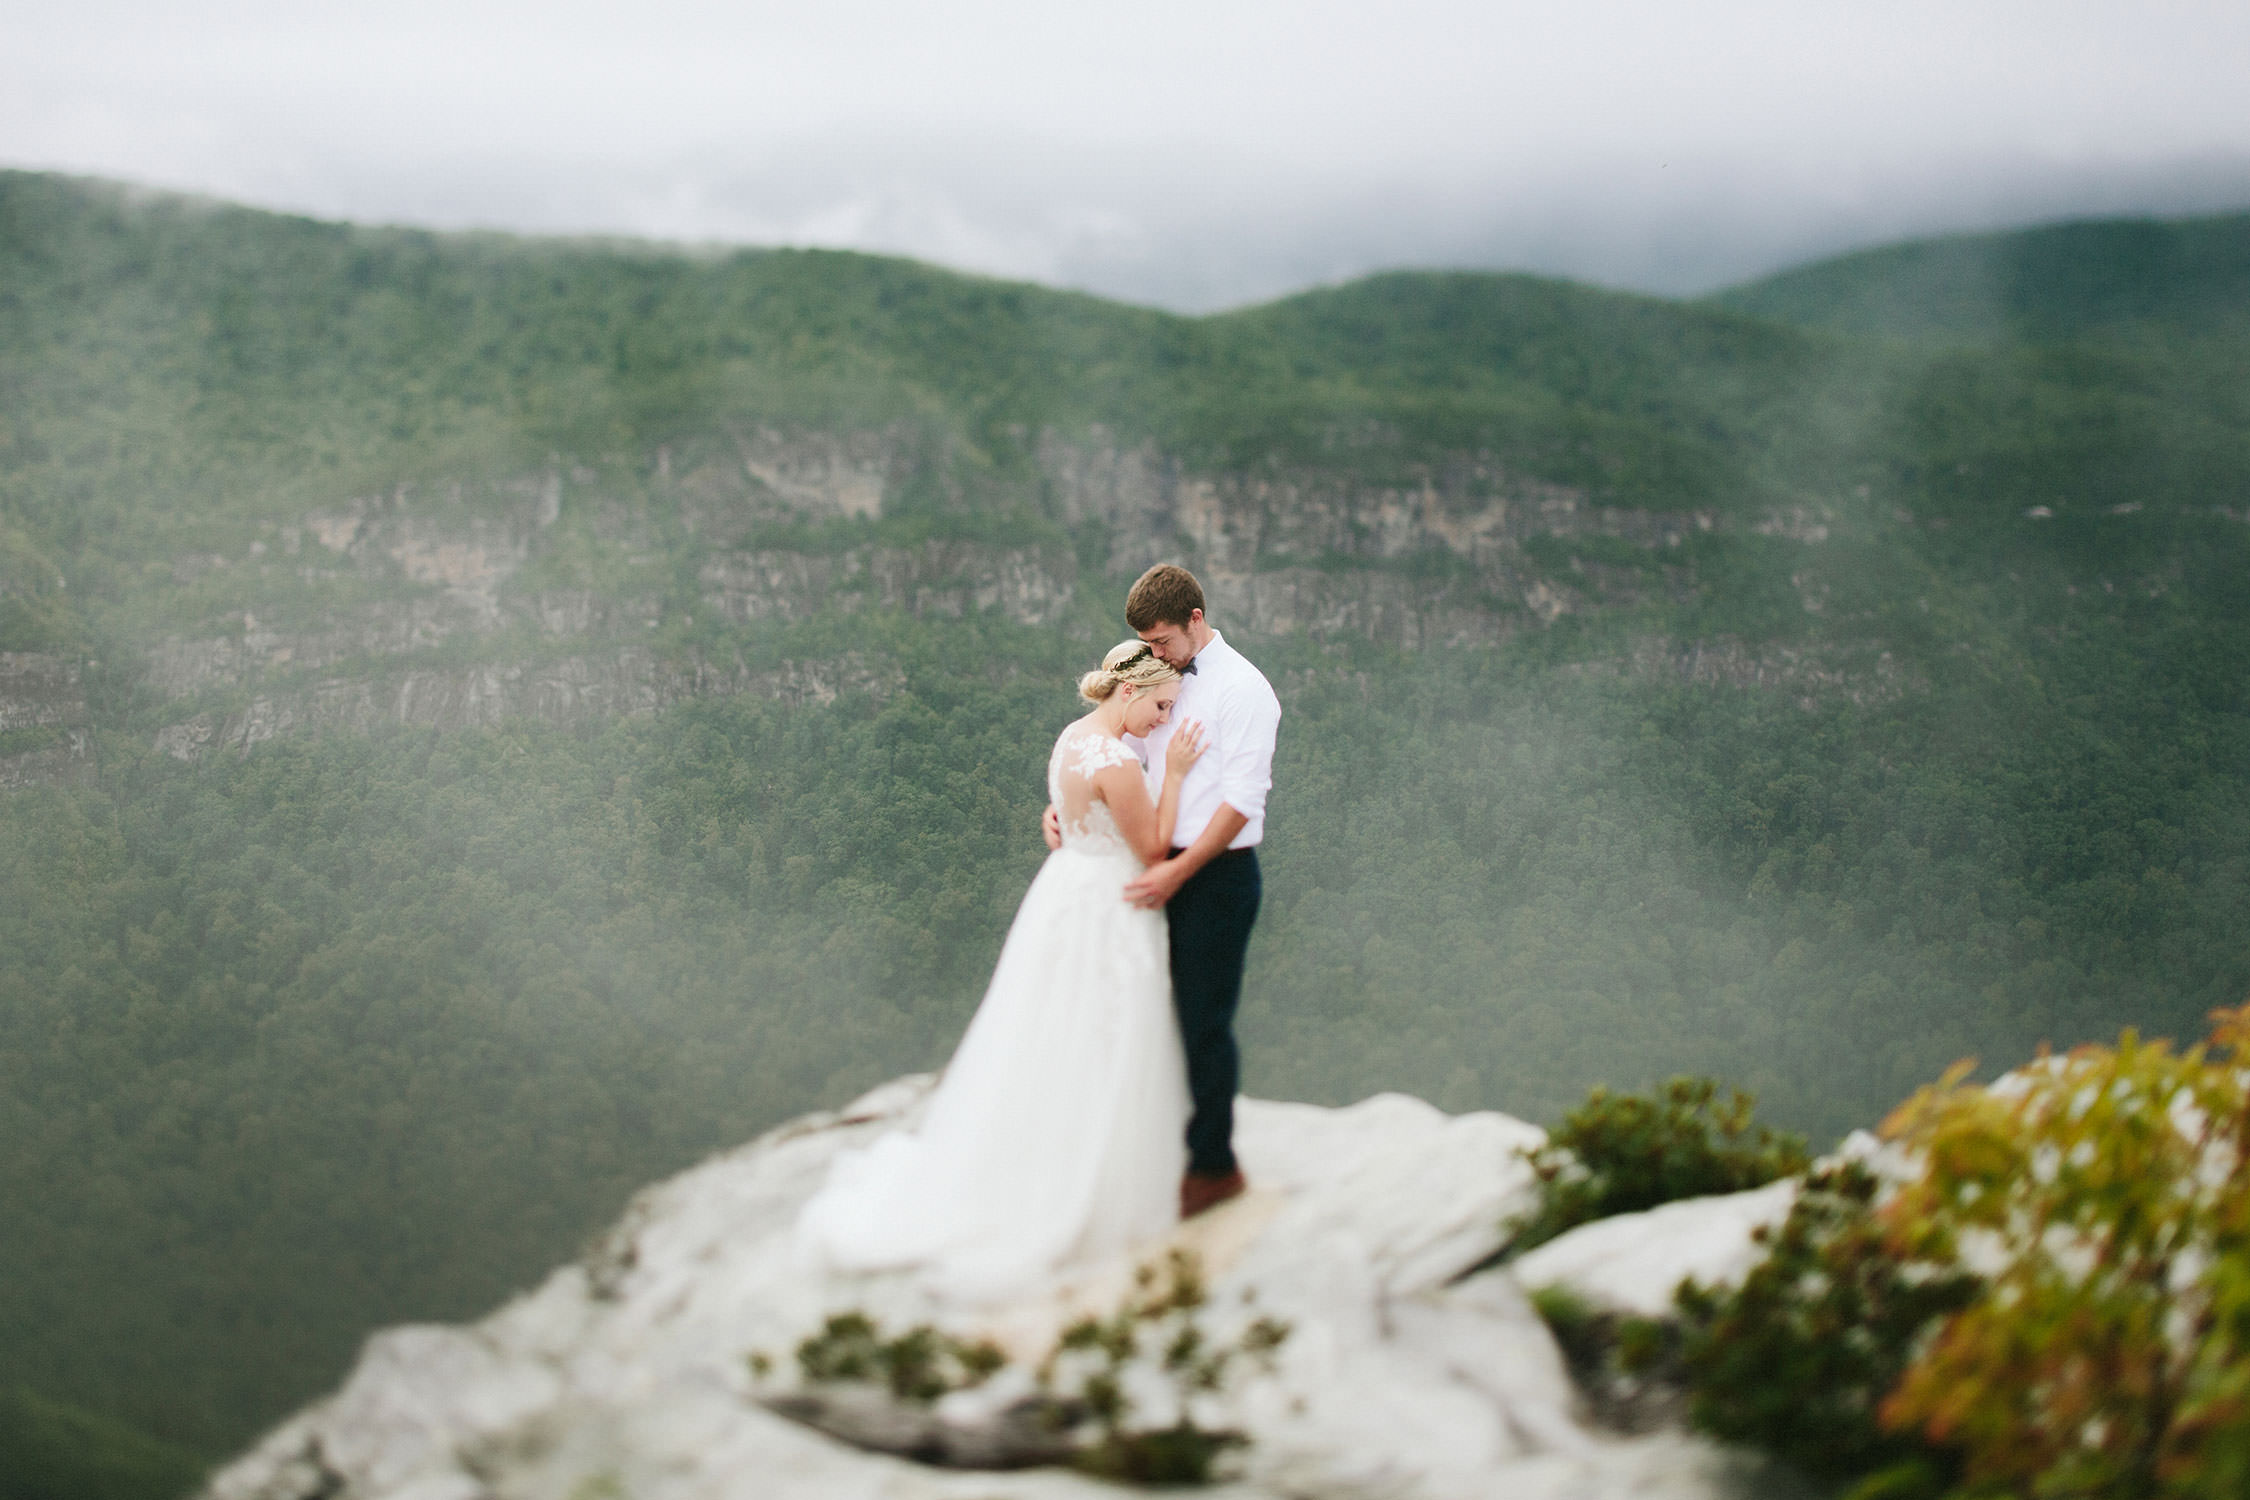 places-to-elope-linville-nc